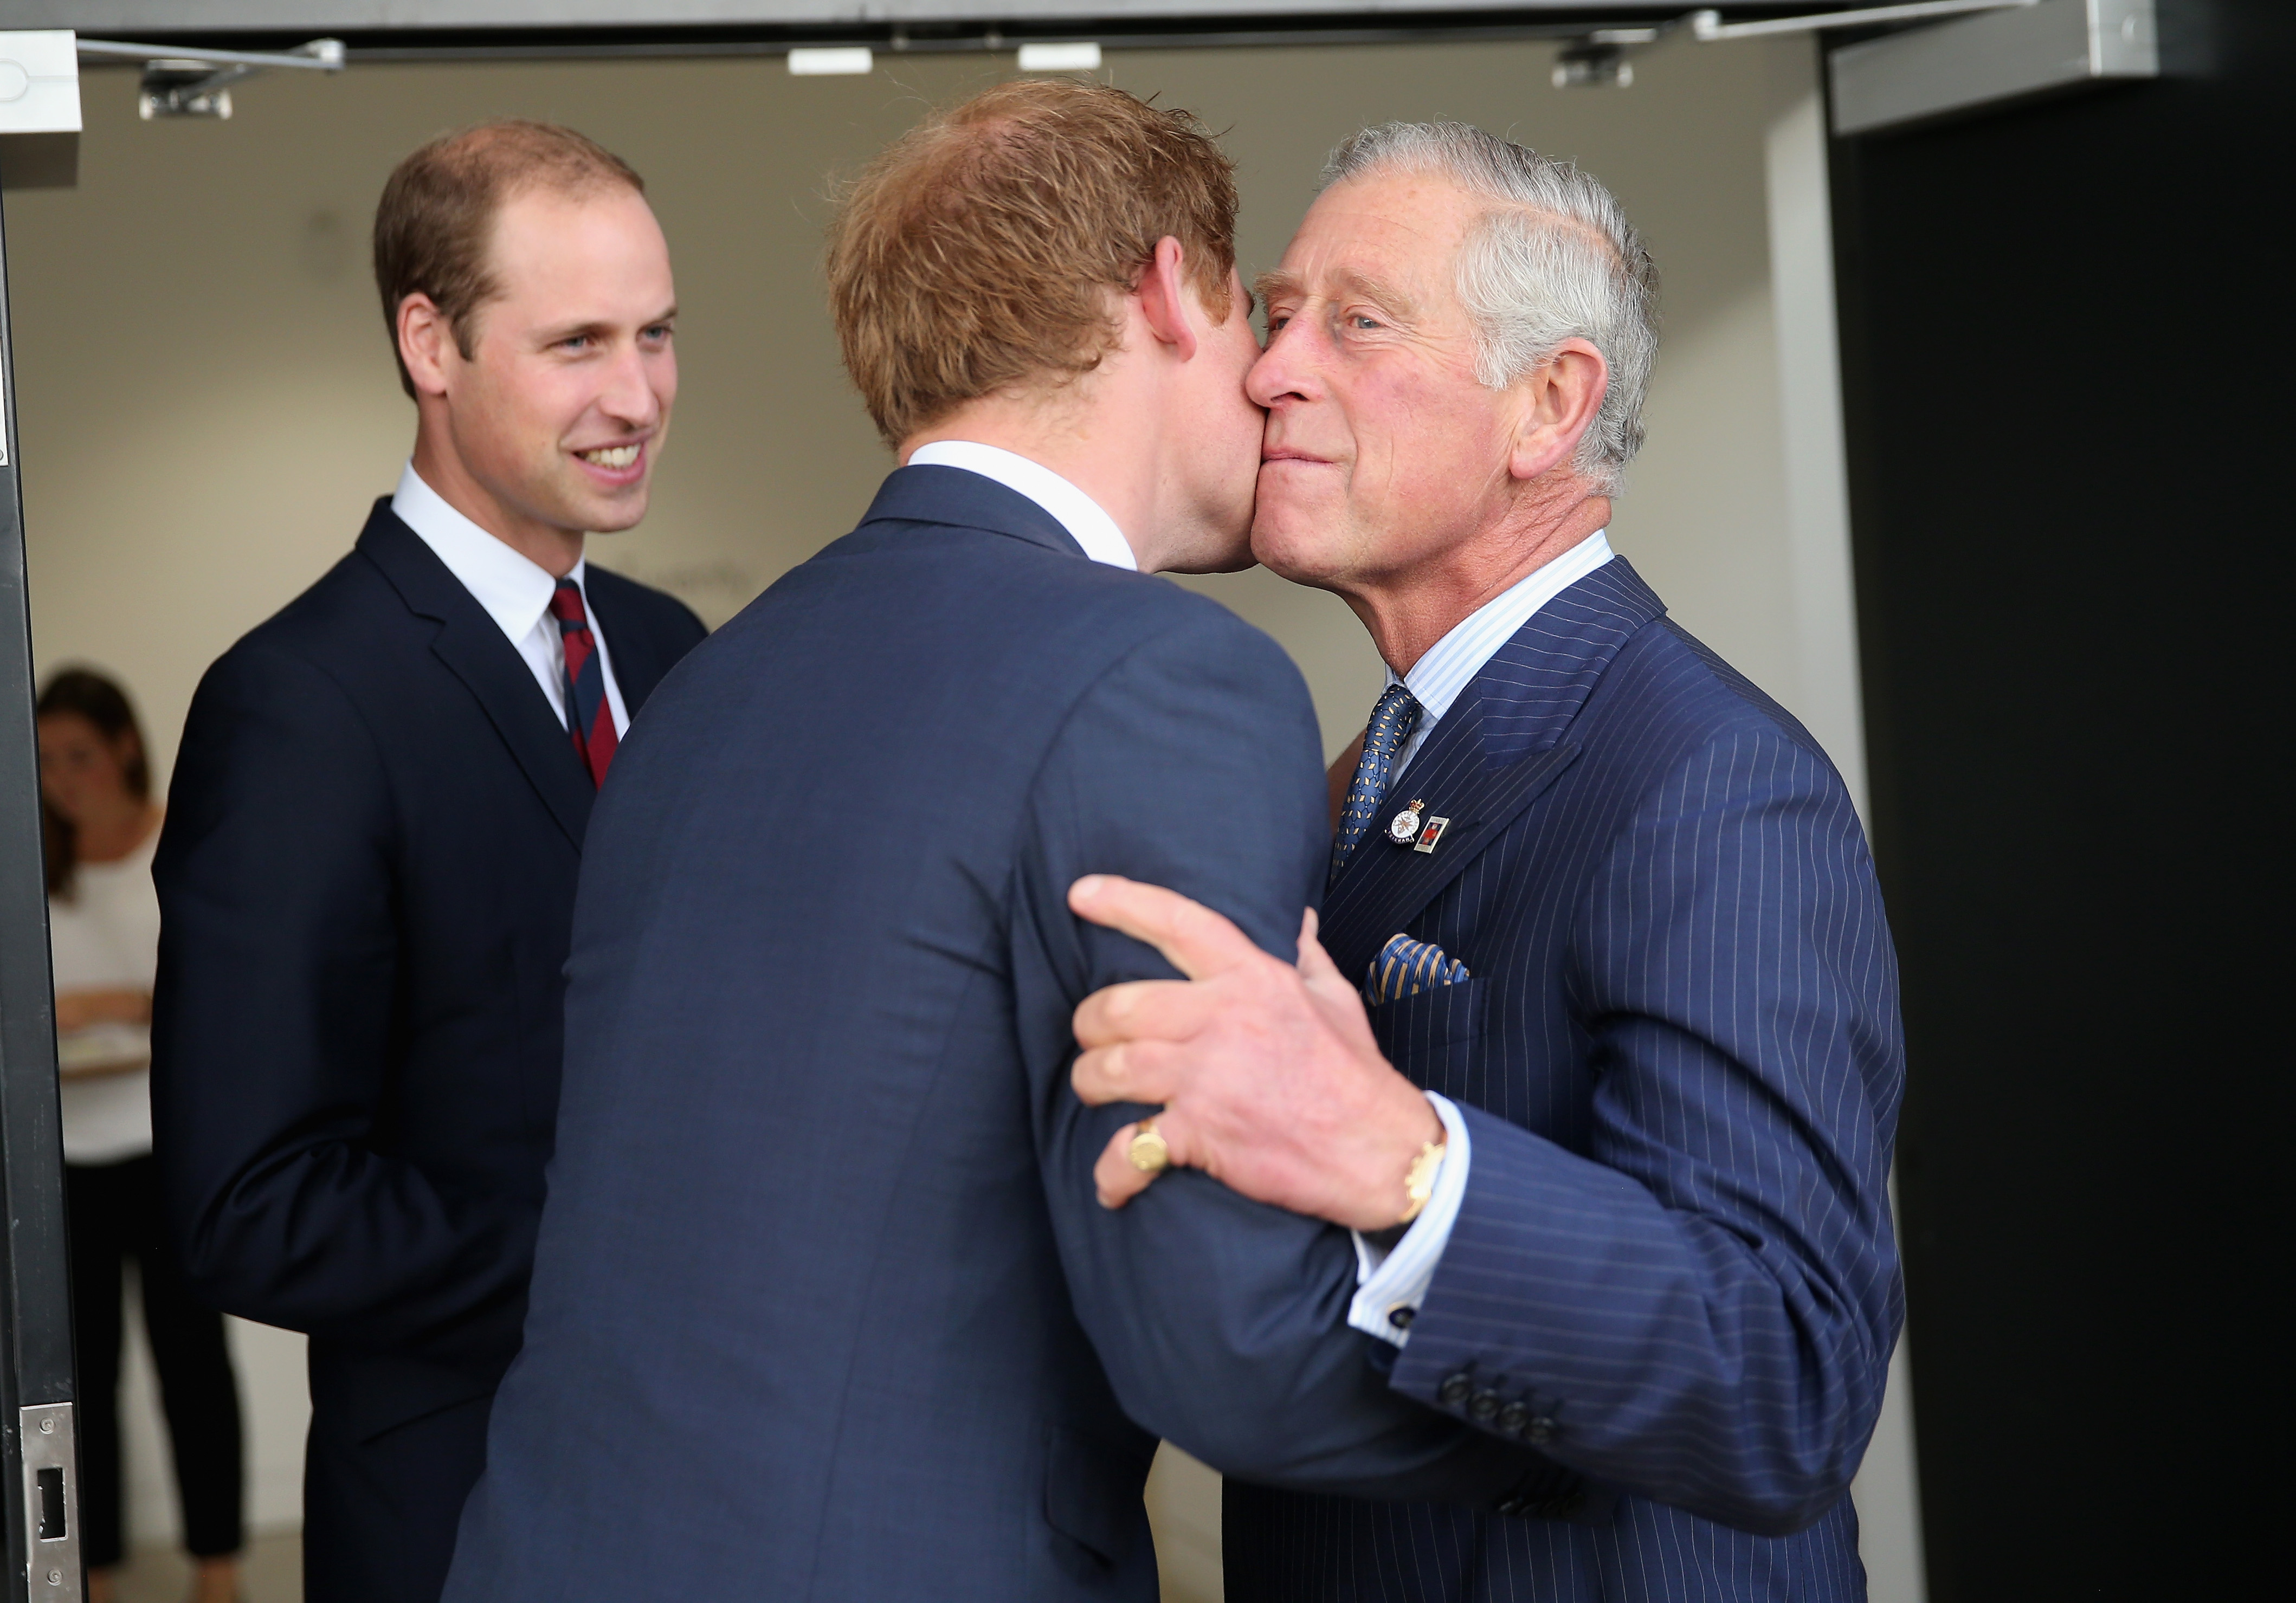 Prince William looks on as King Charles kisses Prince Harry at Queen Elizabeth II Park on September 10, 2014 in London, England. | Source: Getty Images